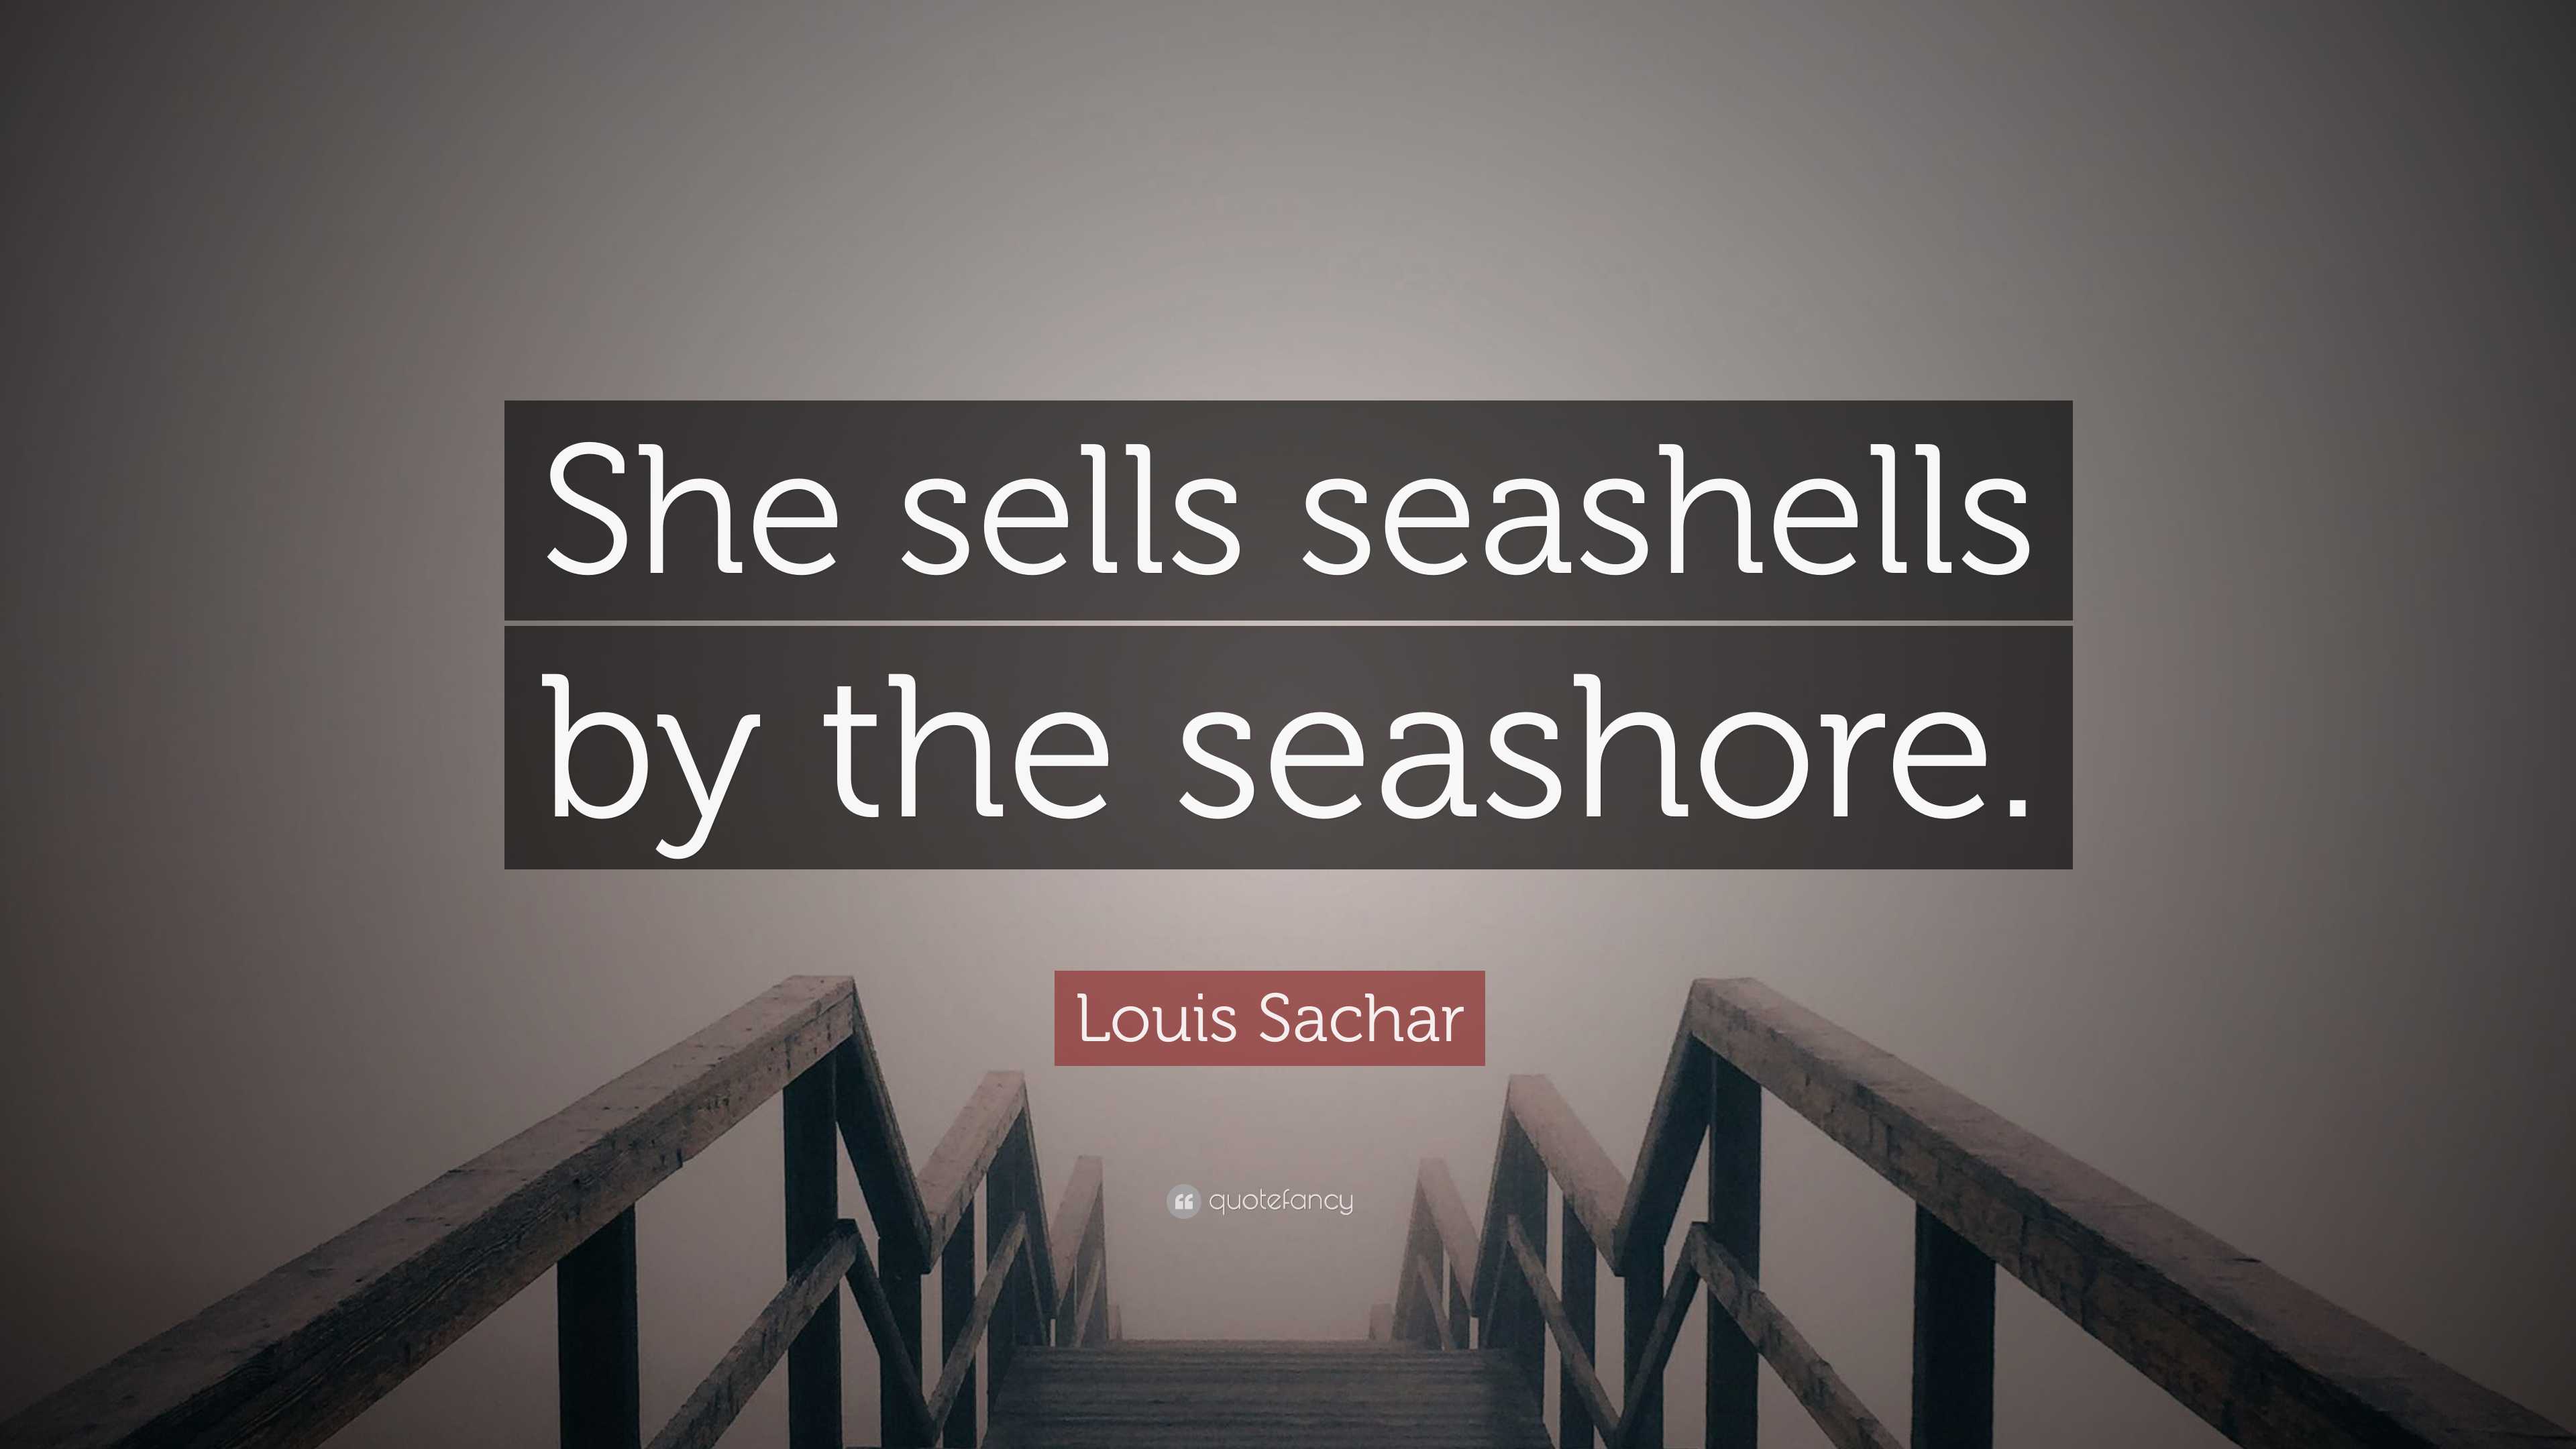 Sell seashells, even on the seashore, and surely breach the law - ABC listen